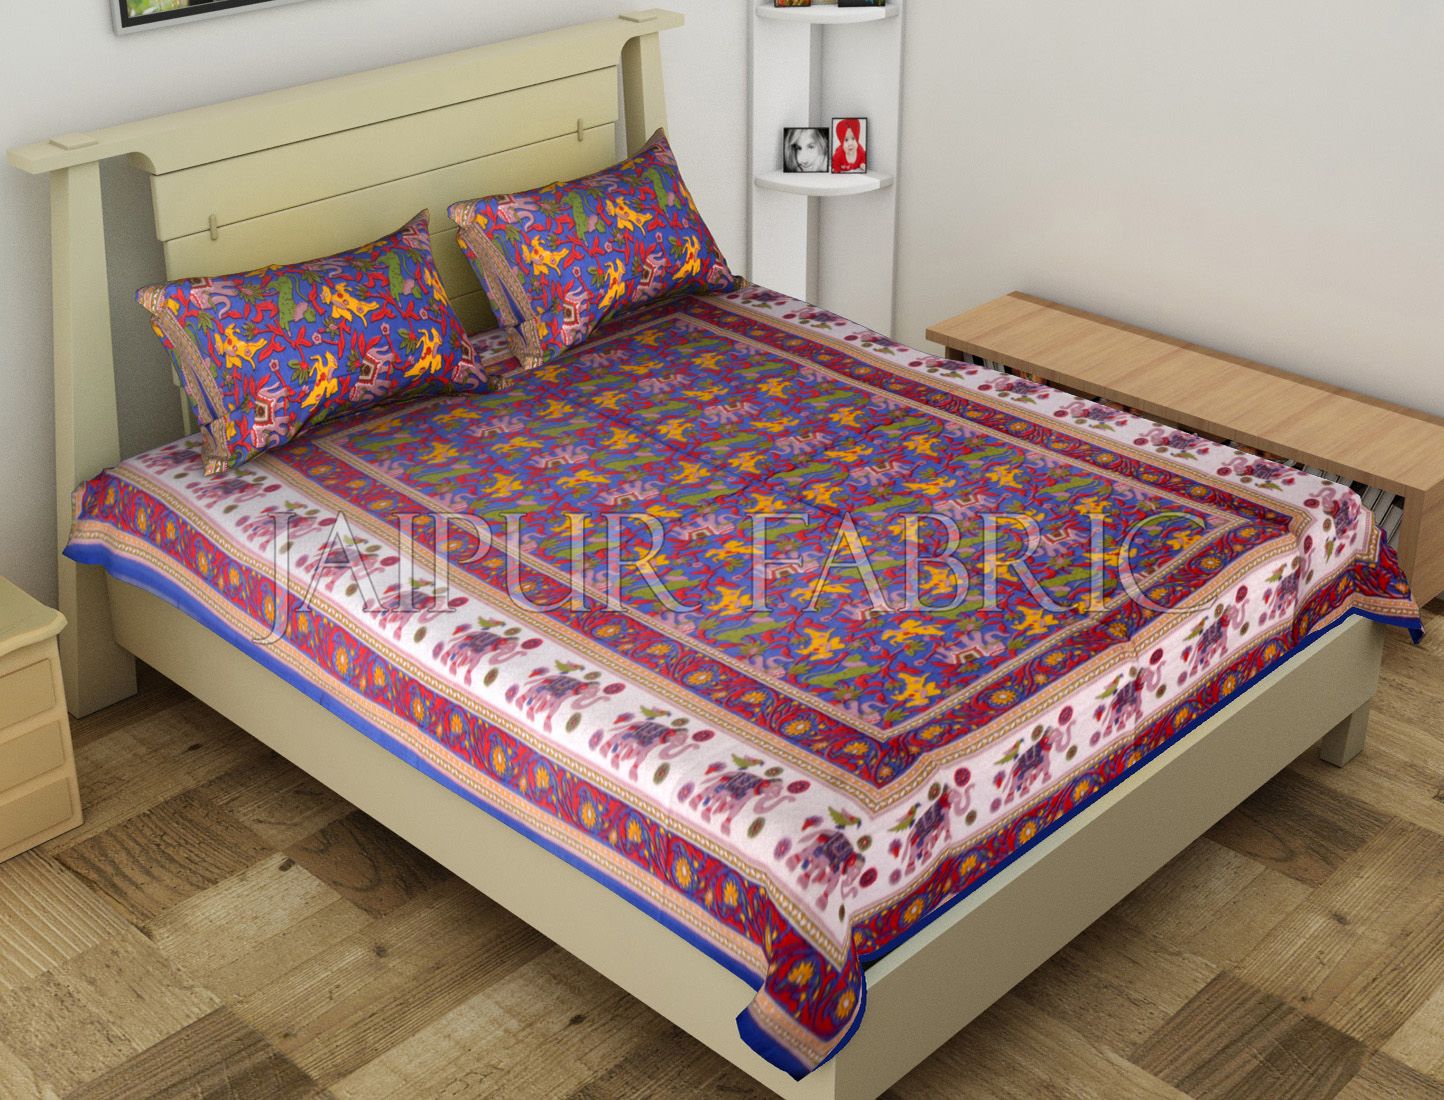 Blue Elephant and Tropical Printed Rajasthani Cotton Single Bed Sheet